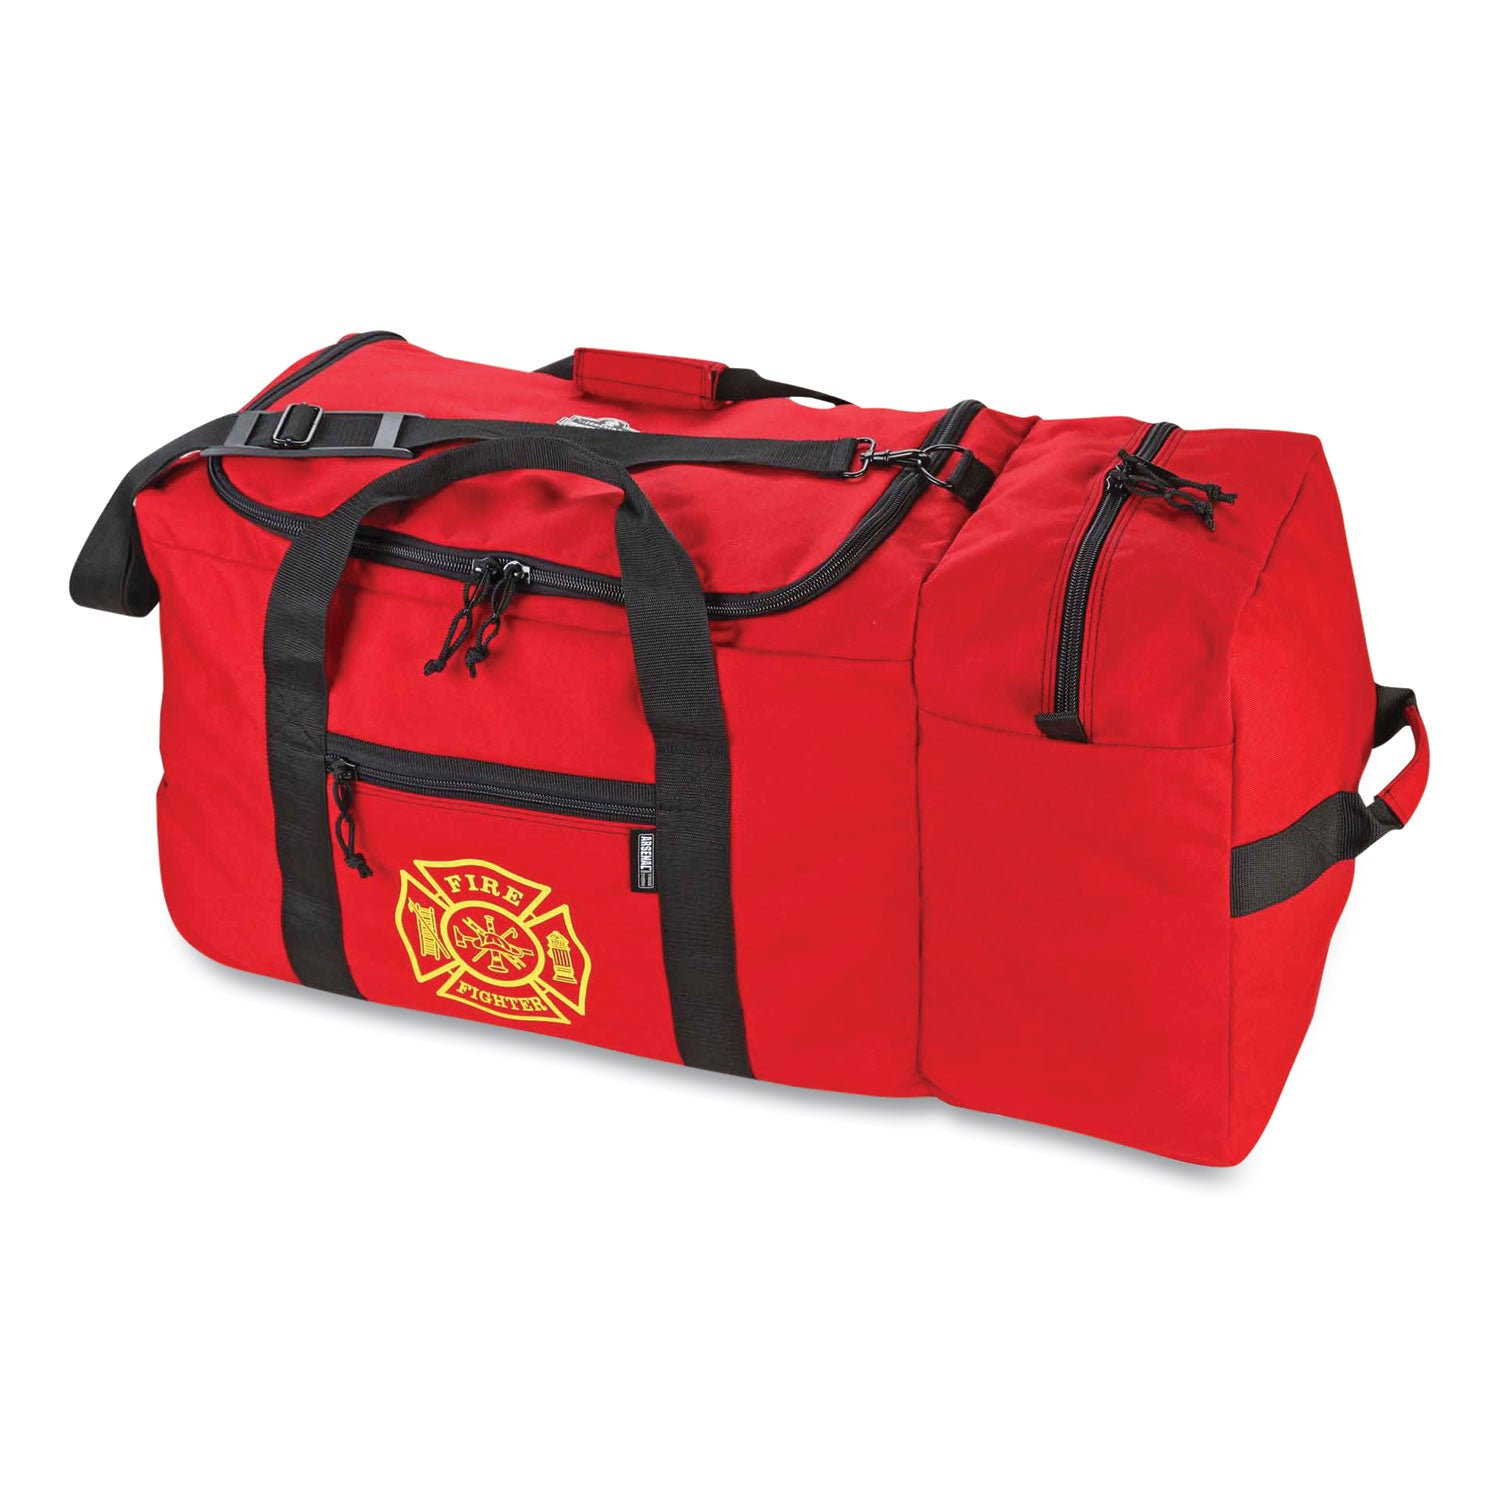 arsenal-5005w-wheeled-fire-+-rescue-gear-bag-14-x-31-x-14-red-ships-in-1-3-business-days_ego13205 - 1